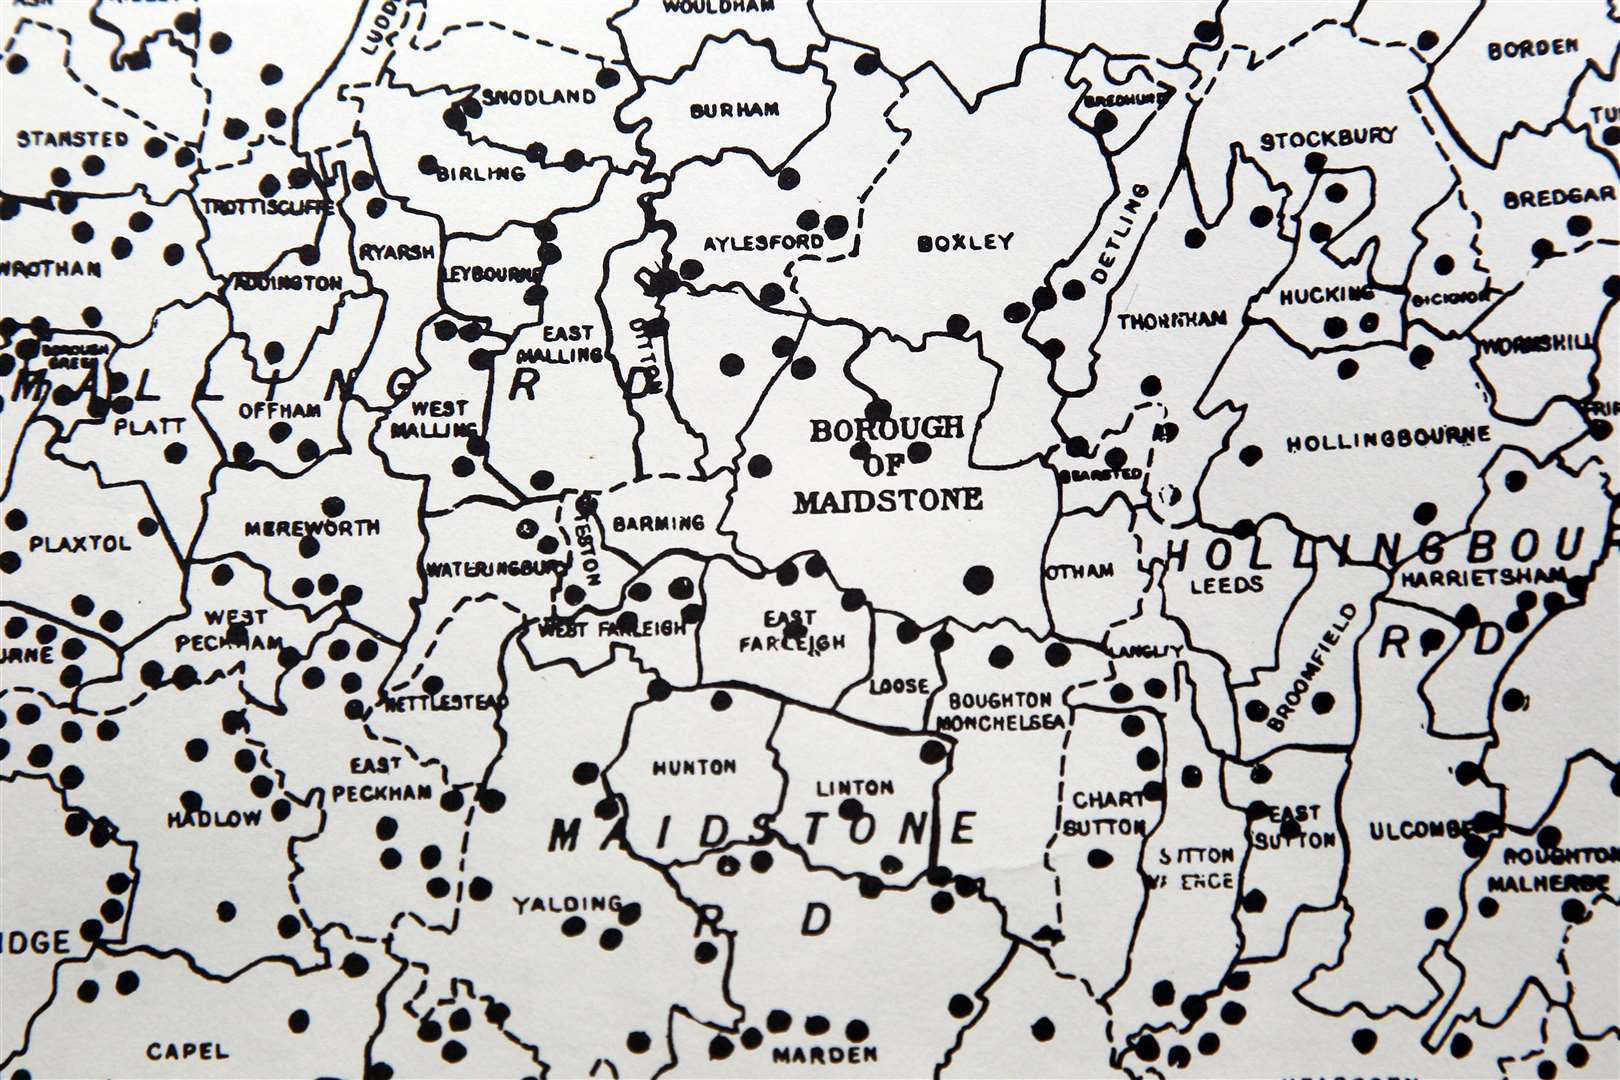 Alan Bignell has been sharing his doodlebug memories, pictured at his home in Barming, with a book showing the locations in Kent where they fell.Picture: Sean AidanAlans map of Kent, the black dots show ehere they fell. (10538040)